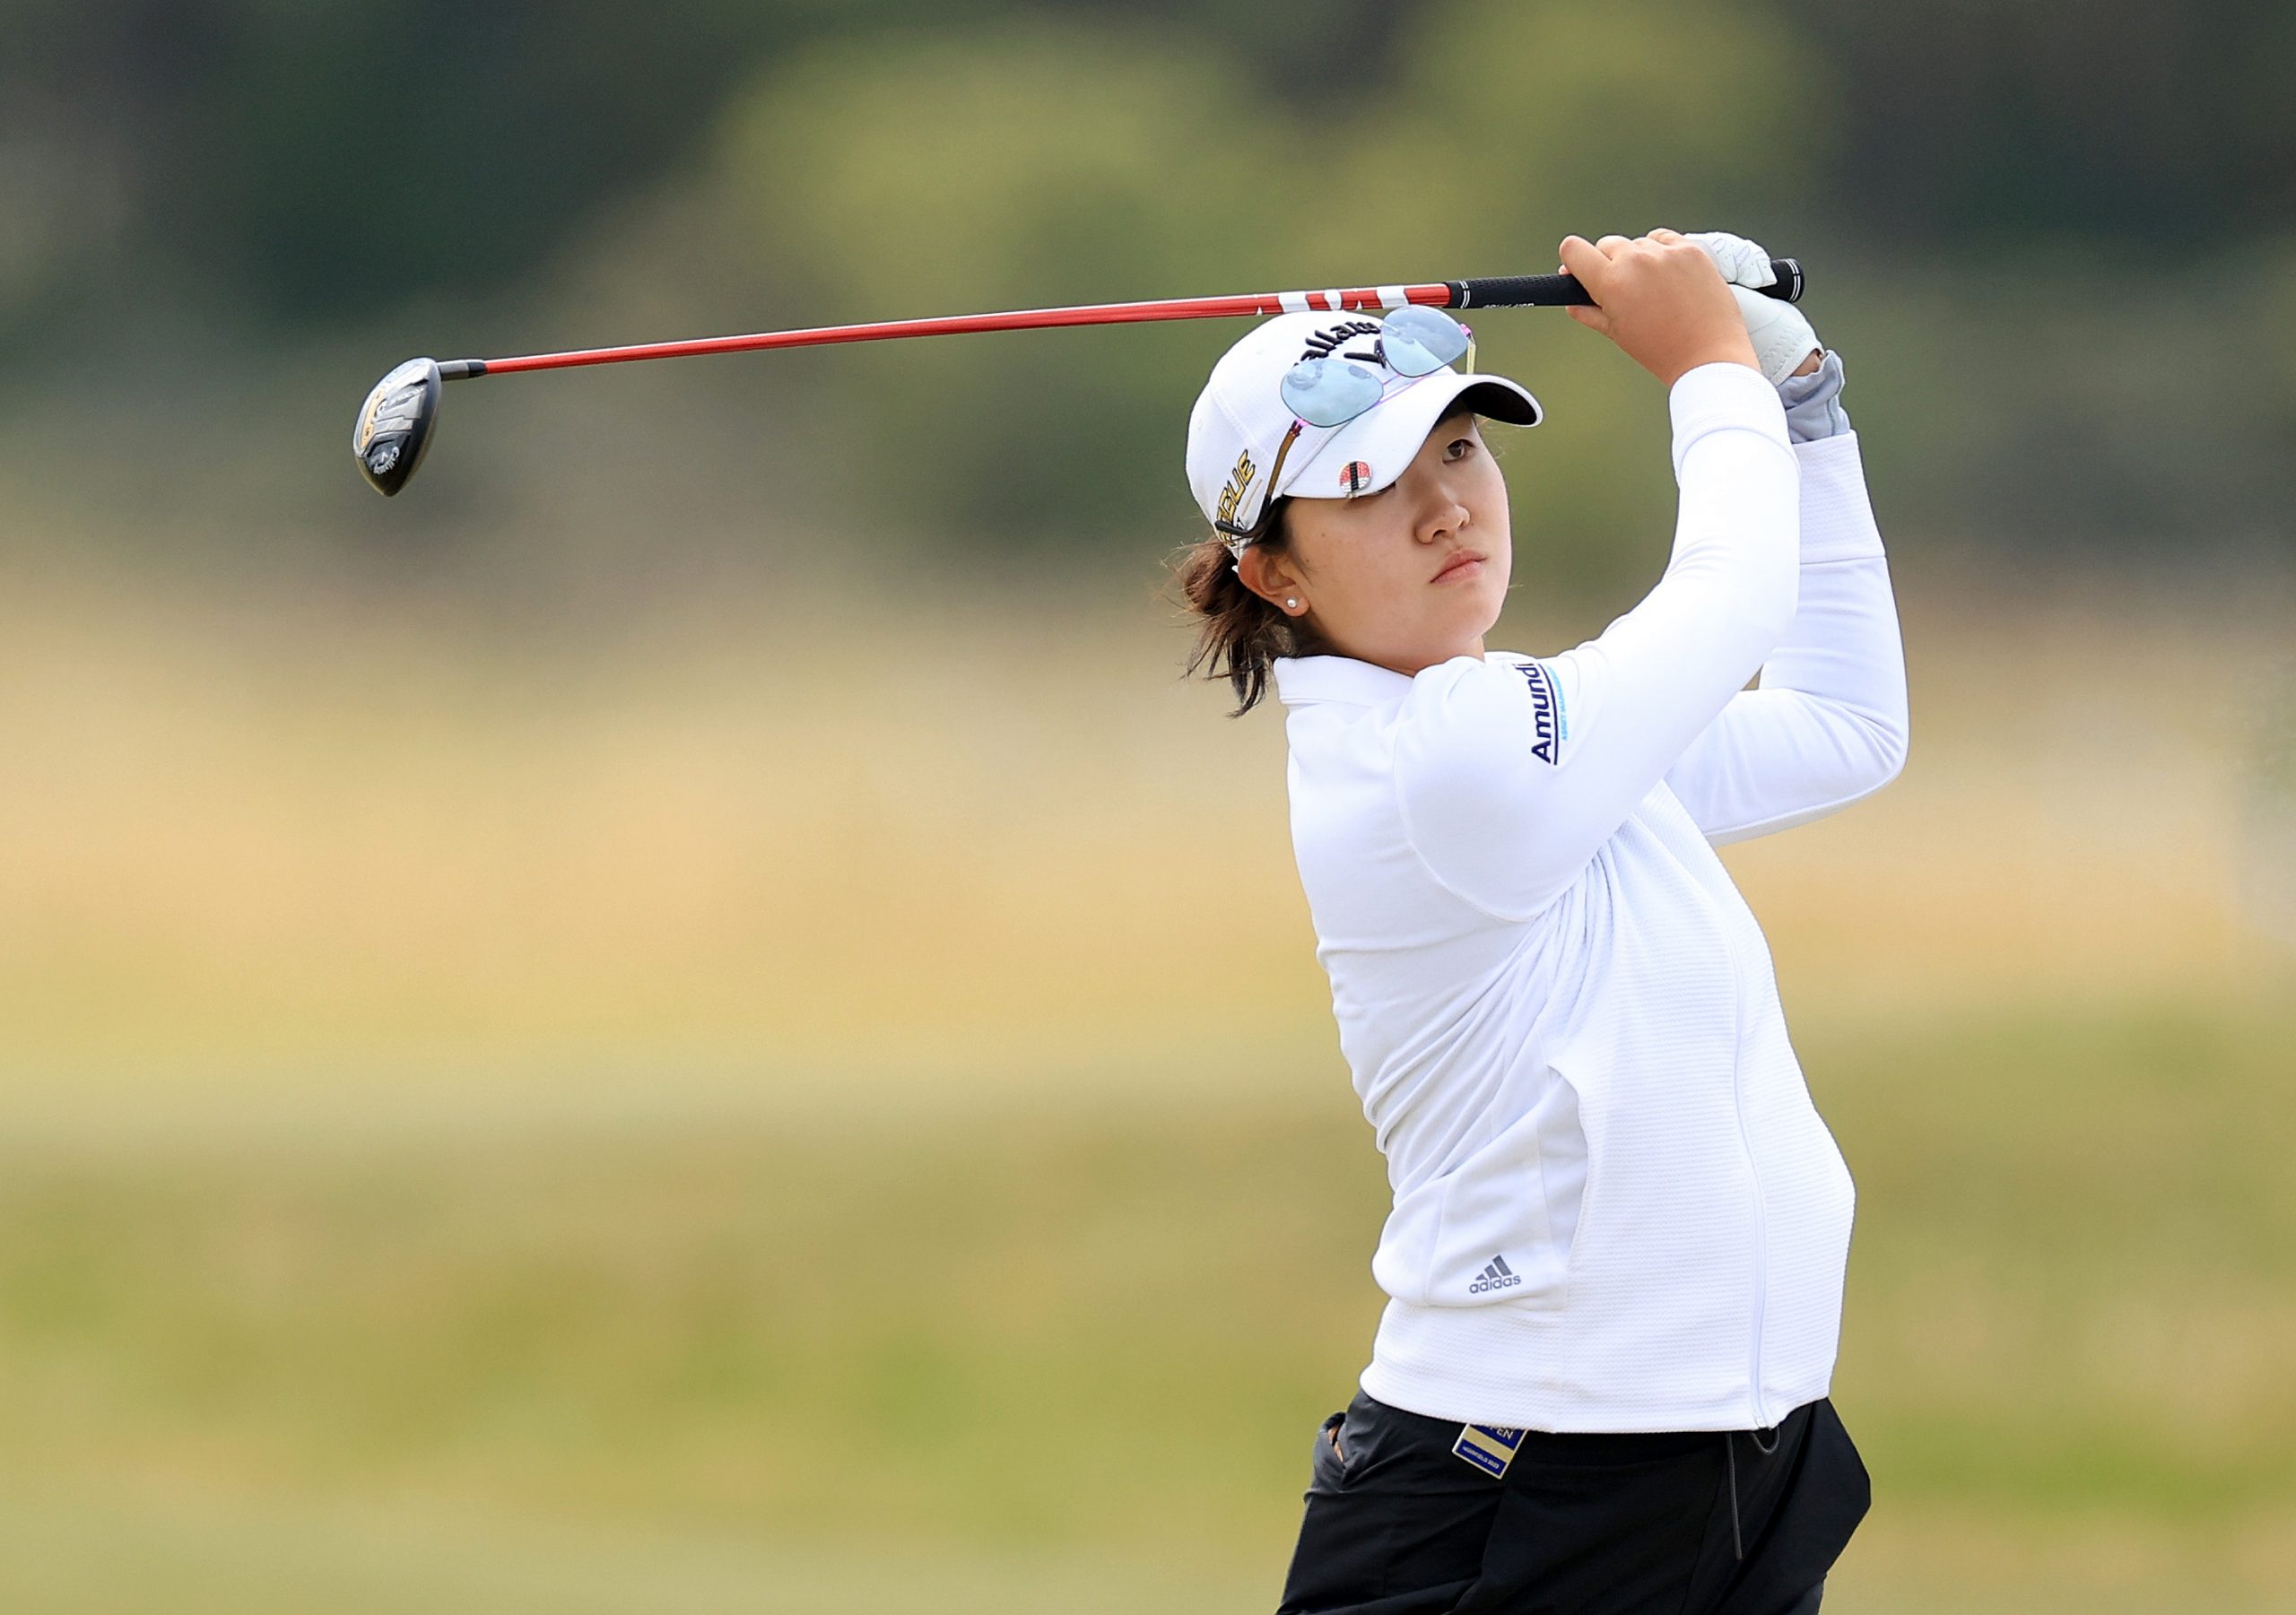 Rose Zhang sets new record for most weeks at World’s leading amateur